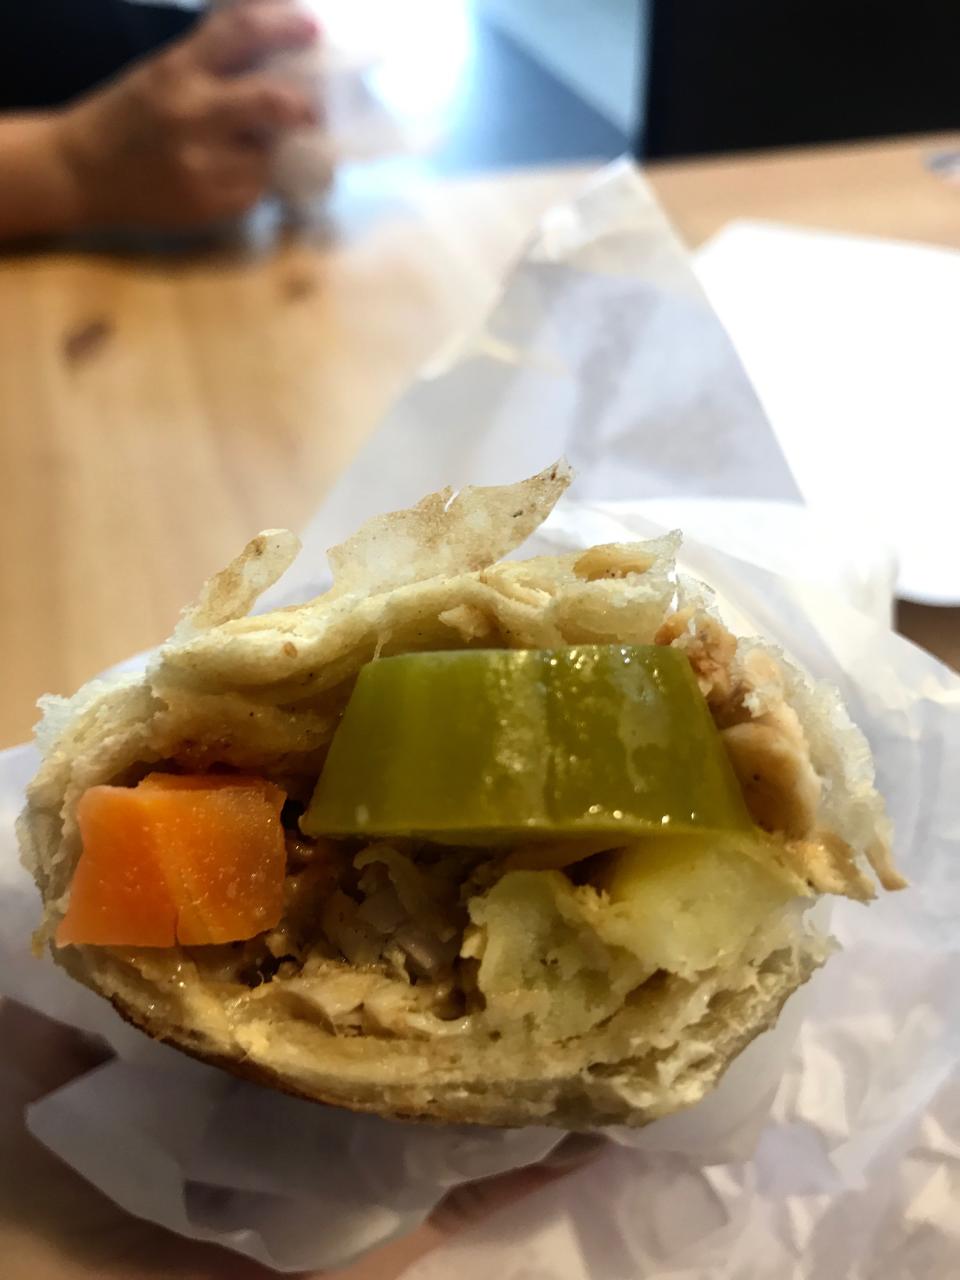 Our driver took us downtown to <span>Al Kalha Cafeteria</span> – his recommendation for best local shawarma in Abu Dhabi. Photo: Yahoo Lifestyle